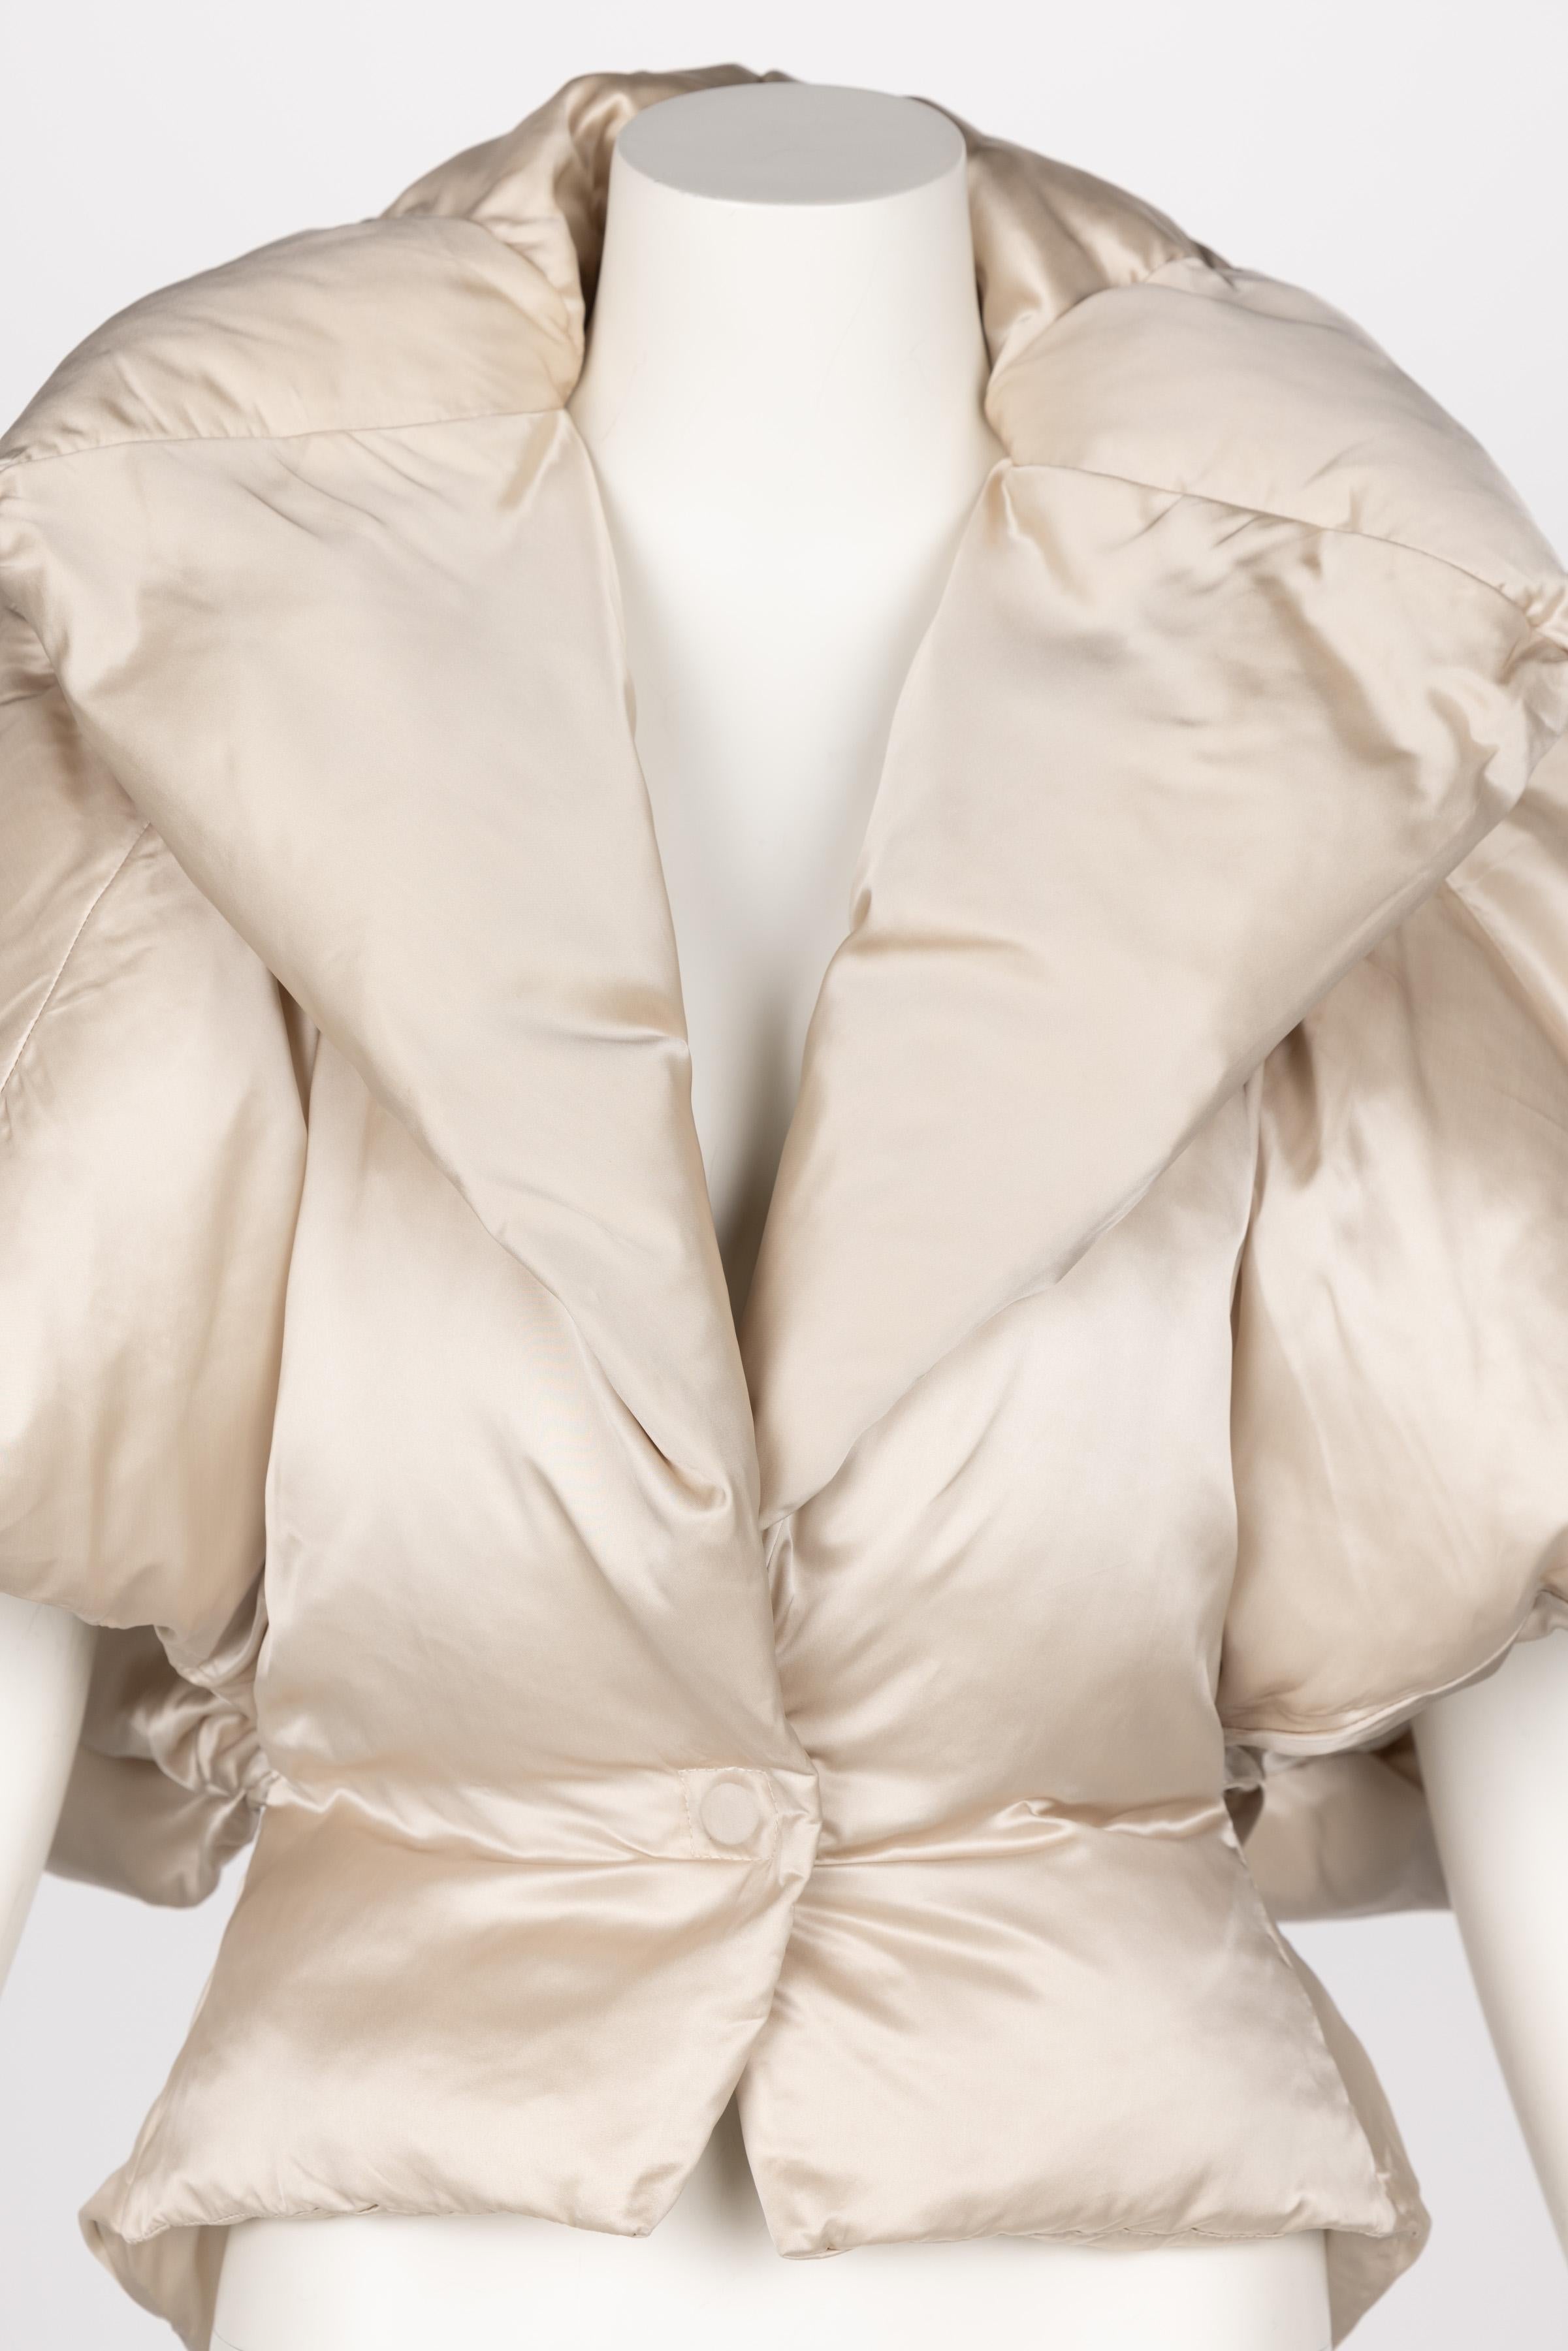 Stella McCartney F/W 2004 Champagne Sculptural Show Stopping Puffer Jacket For Sale 2